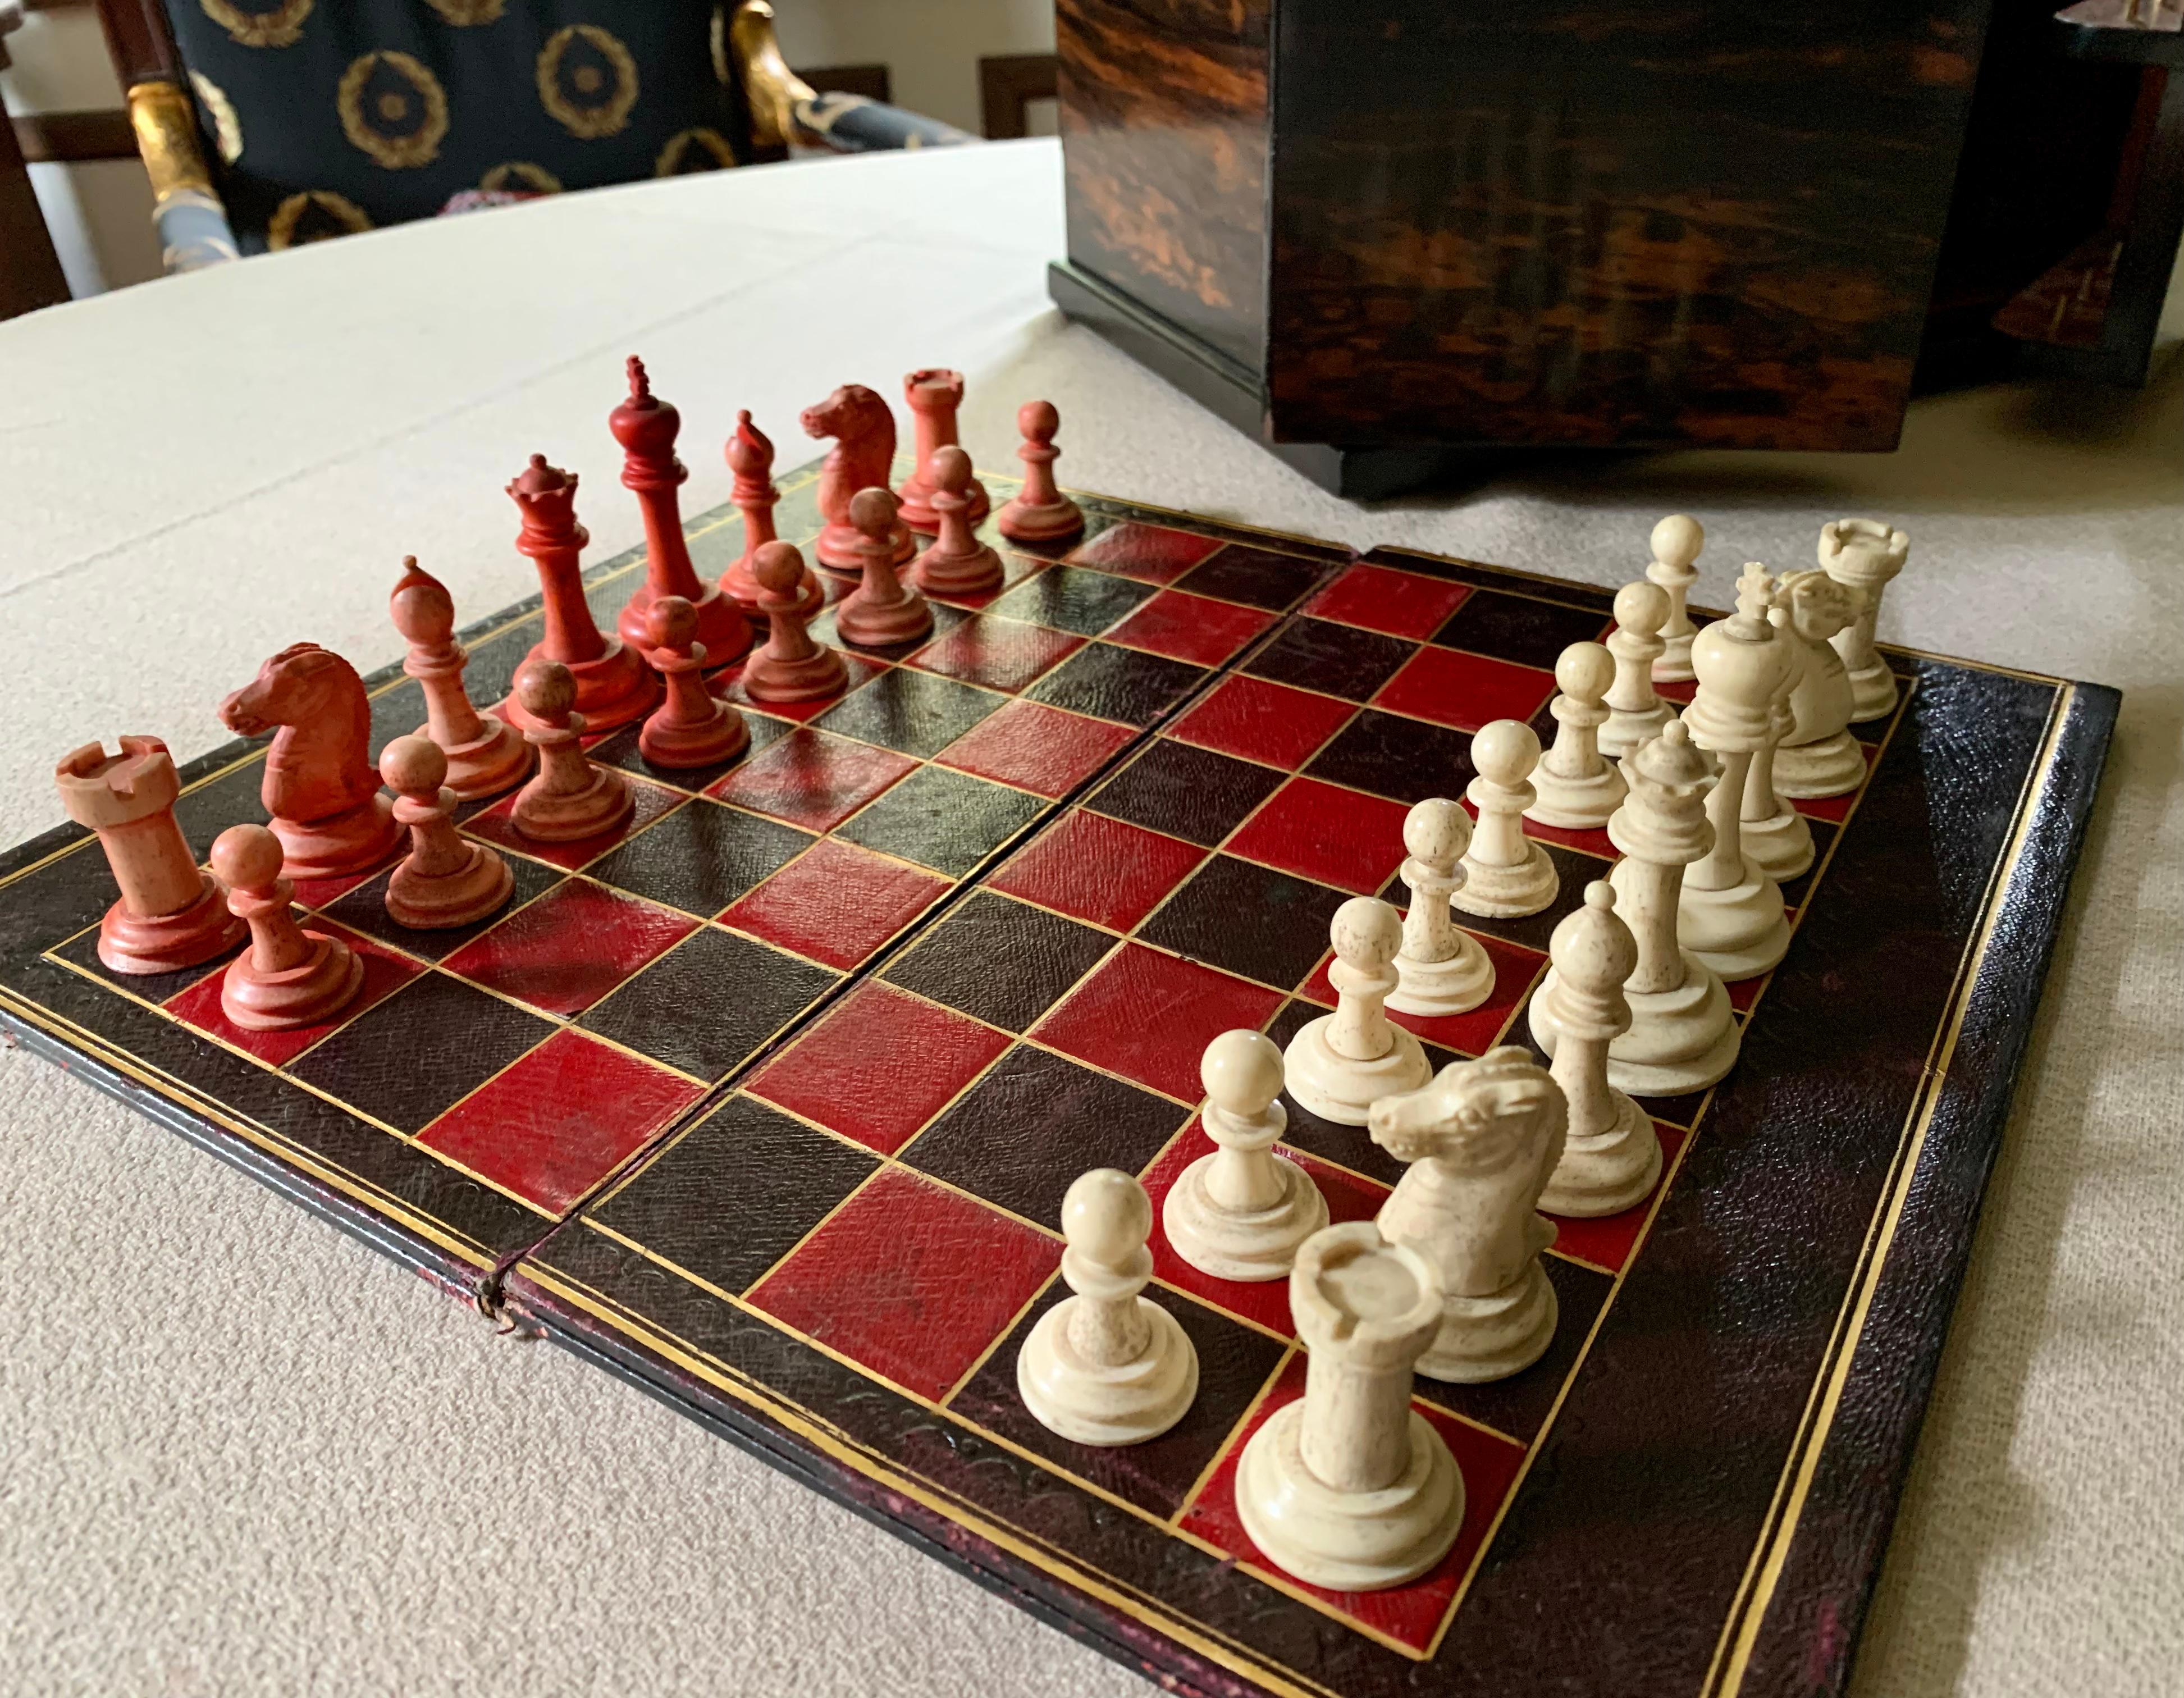 One of the finest game boxes we've had the pleasure of offering, classic Regency Style, the case beautifully constructed of rare, dramatically figured Coromandel wood, lift top with front panel doors opening to reveal a hand carved chess set of